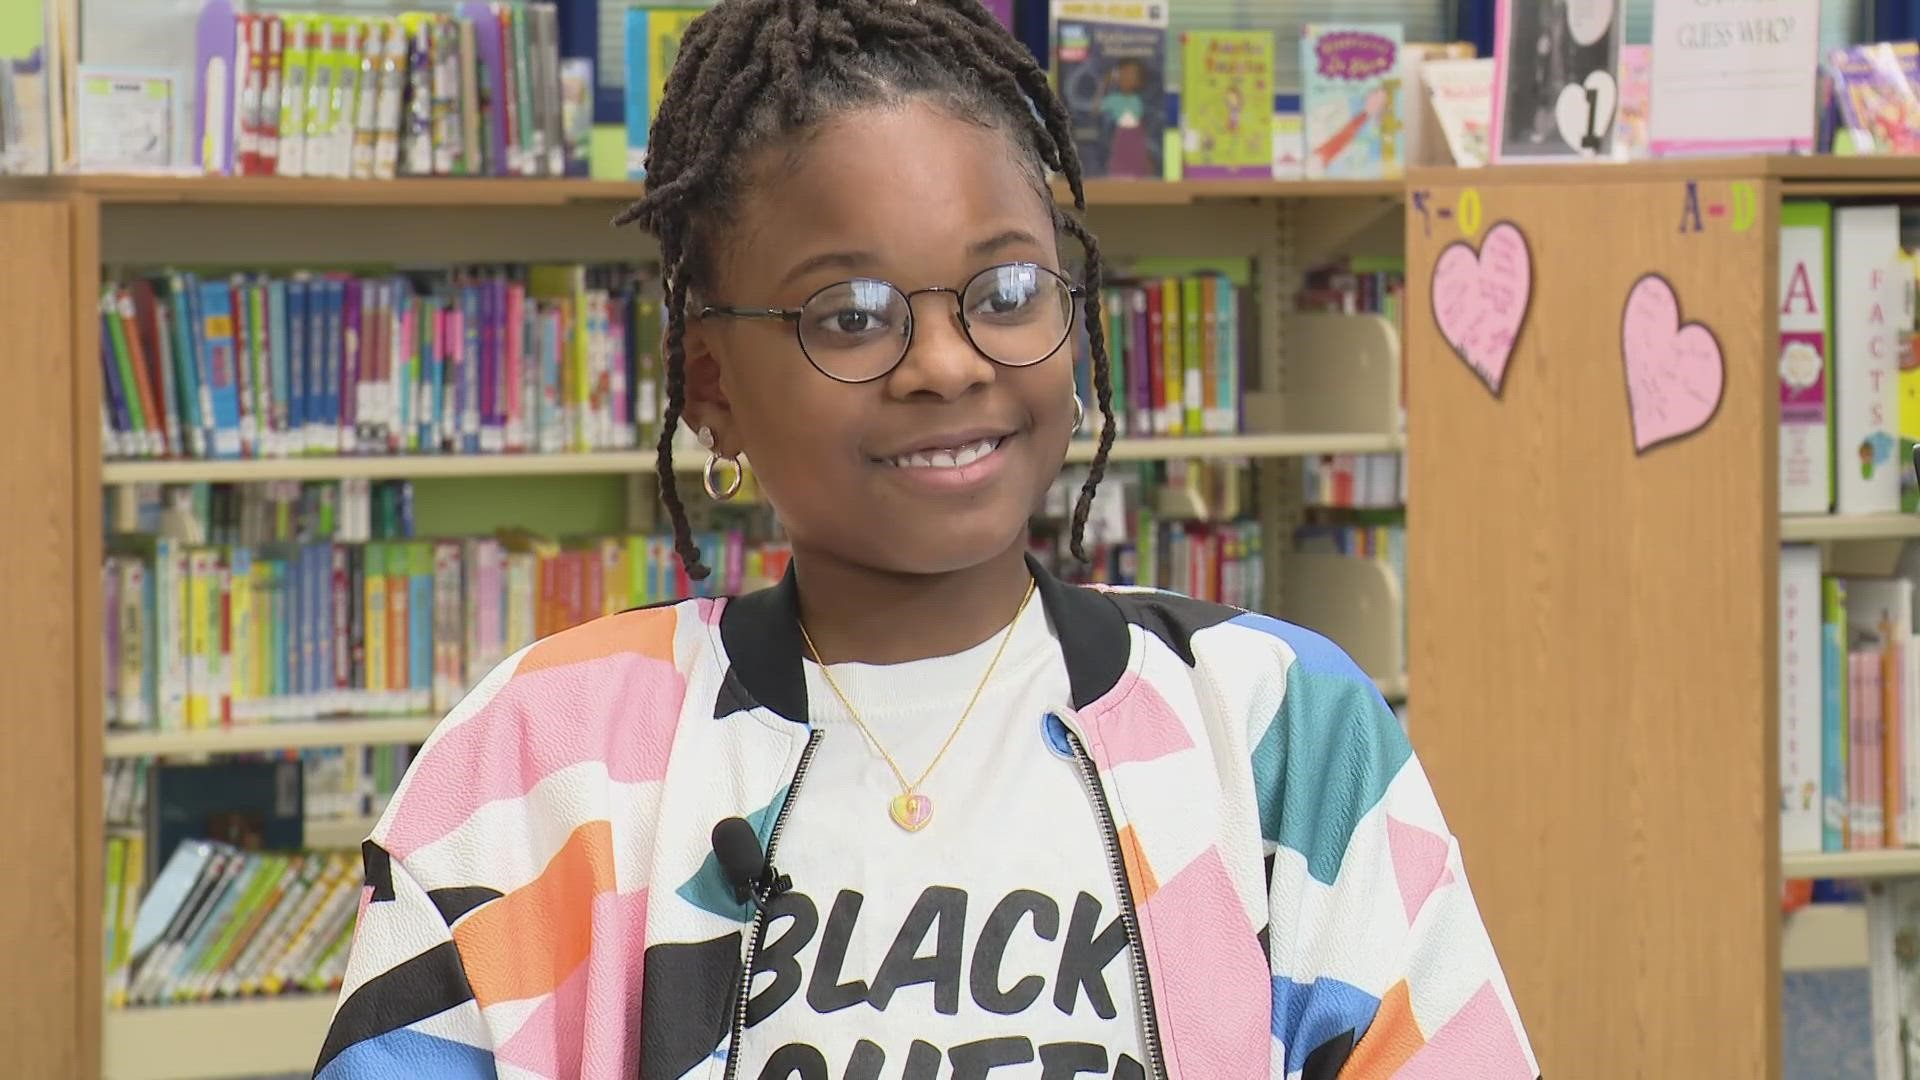 Haleigh Ingram wrote her first book at just 7 years old. Her book, "I Am: Everything They Said I Couldn't Be," tells the inspiring stories of Black women.